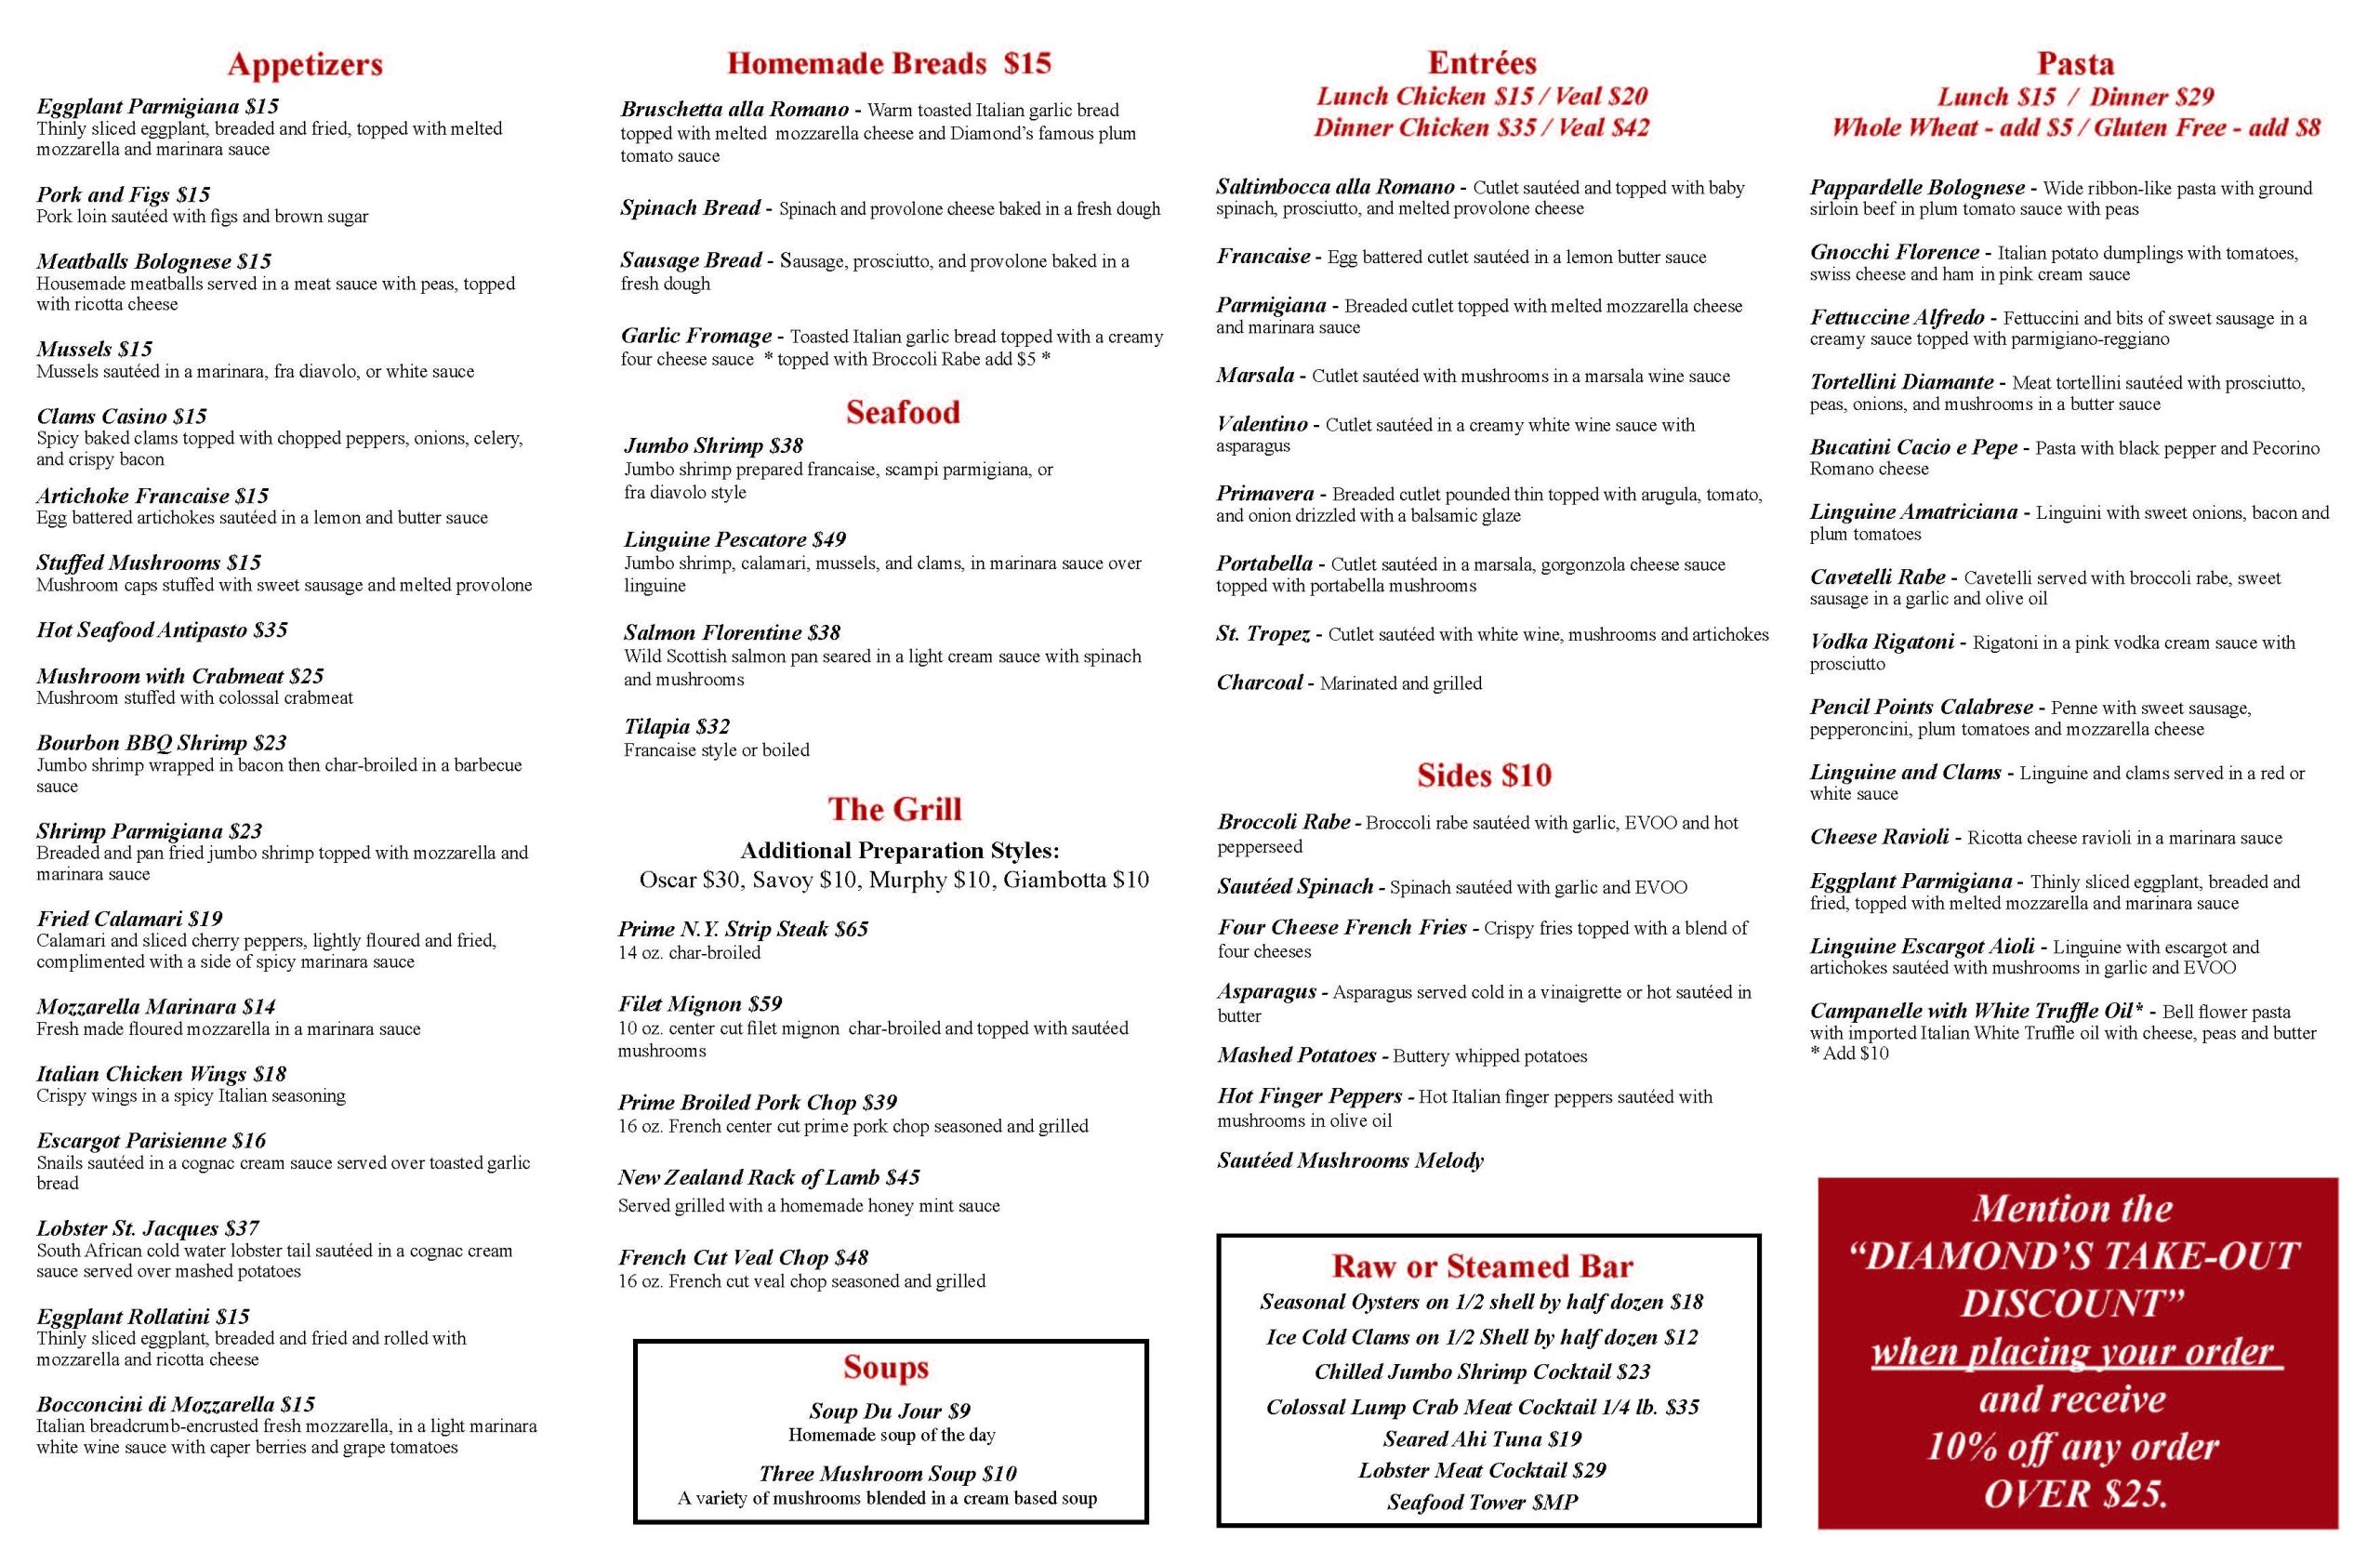 Text-based menu featuring sections for appetizers, seafood, homemade breads, the grill, steaks, soups, and a promotional discount for pasta take-out orders.